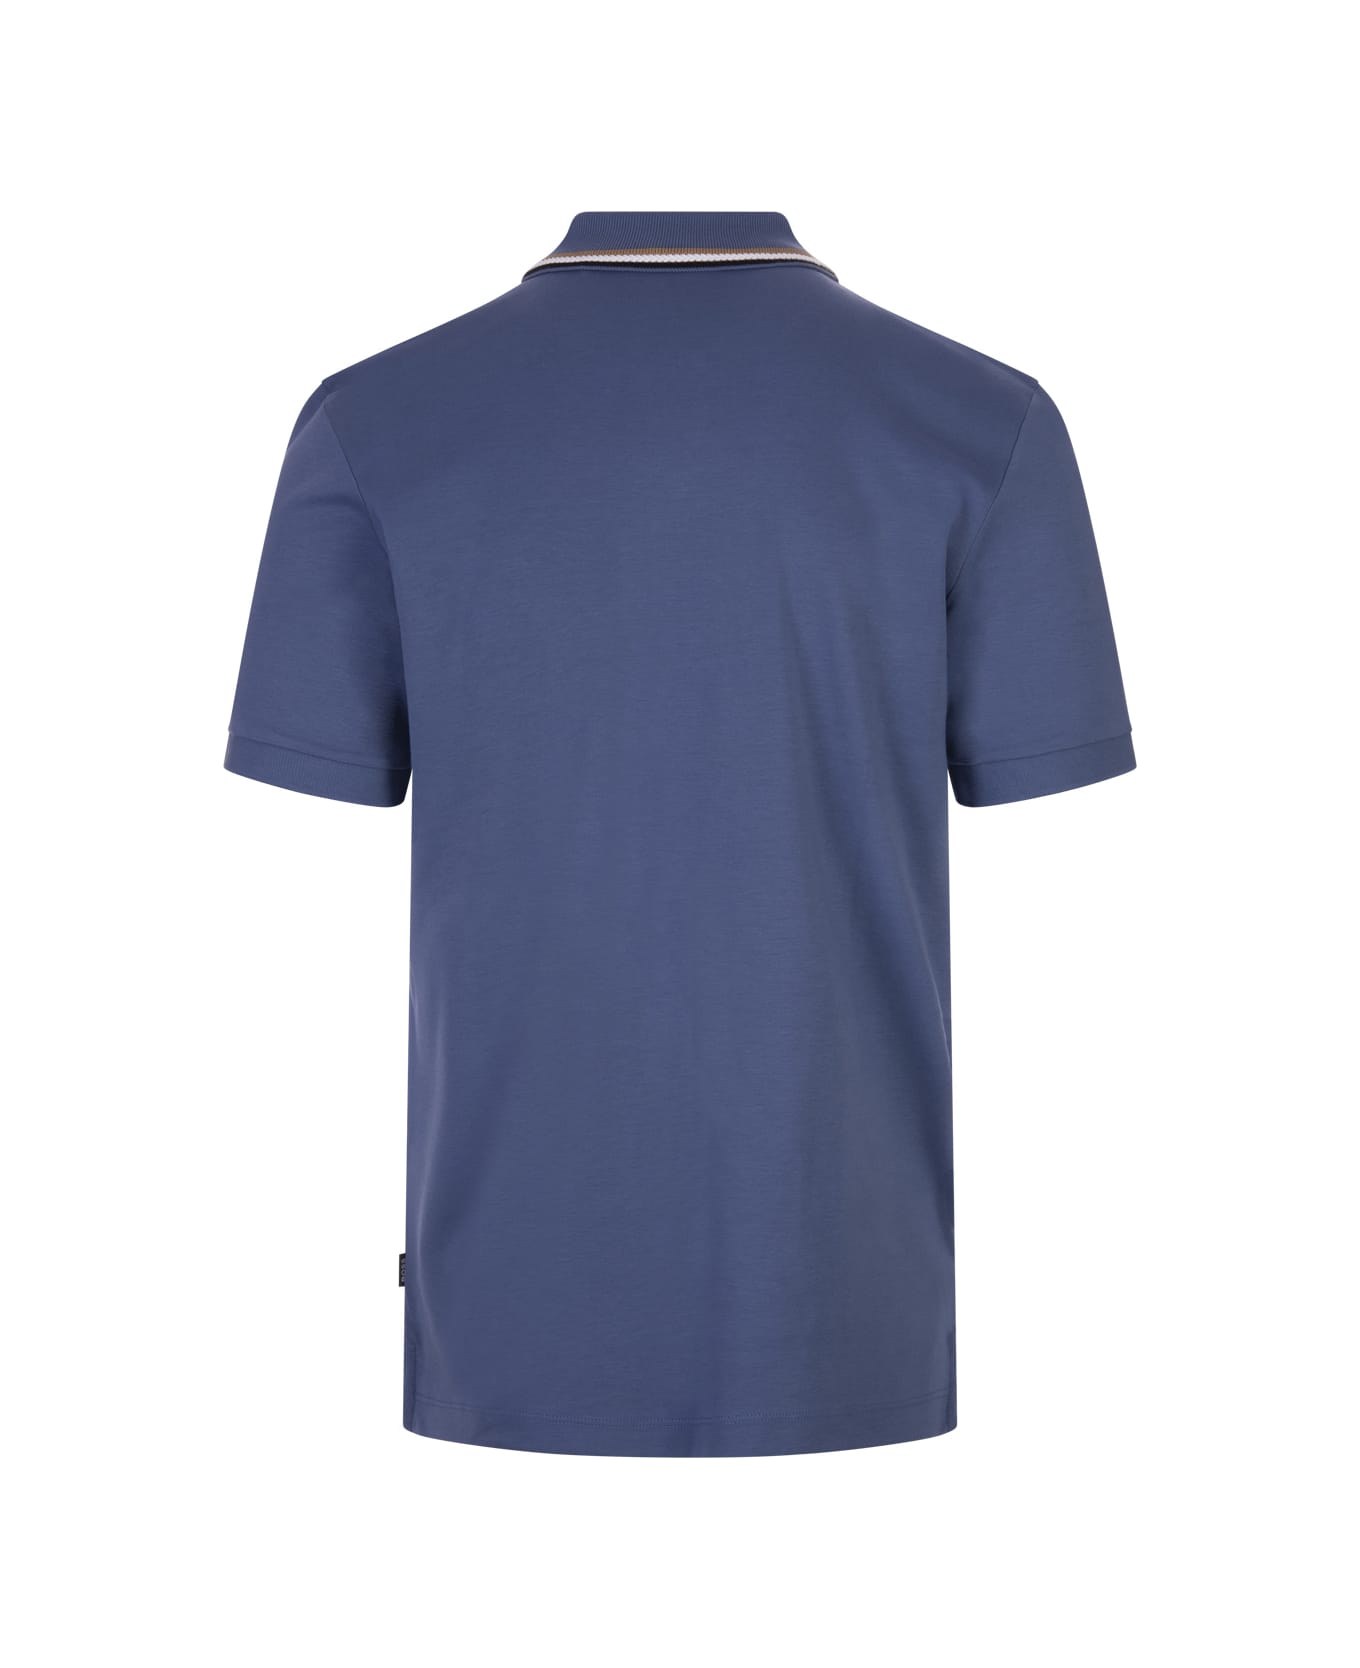 Hugo Boss Cerulean Blue Slim Fit Polo Shirt With Striped Collar - Blue